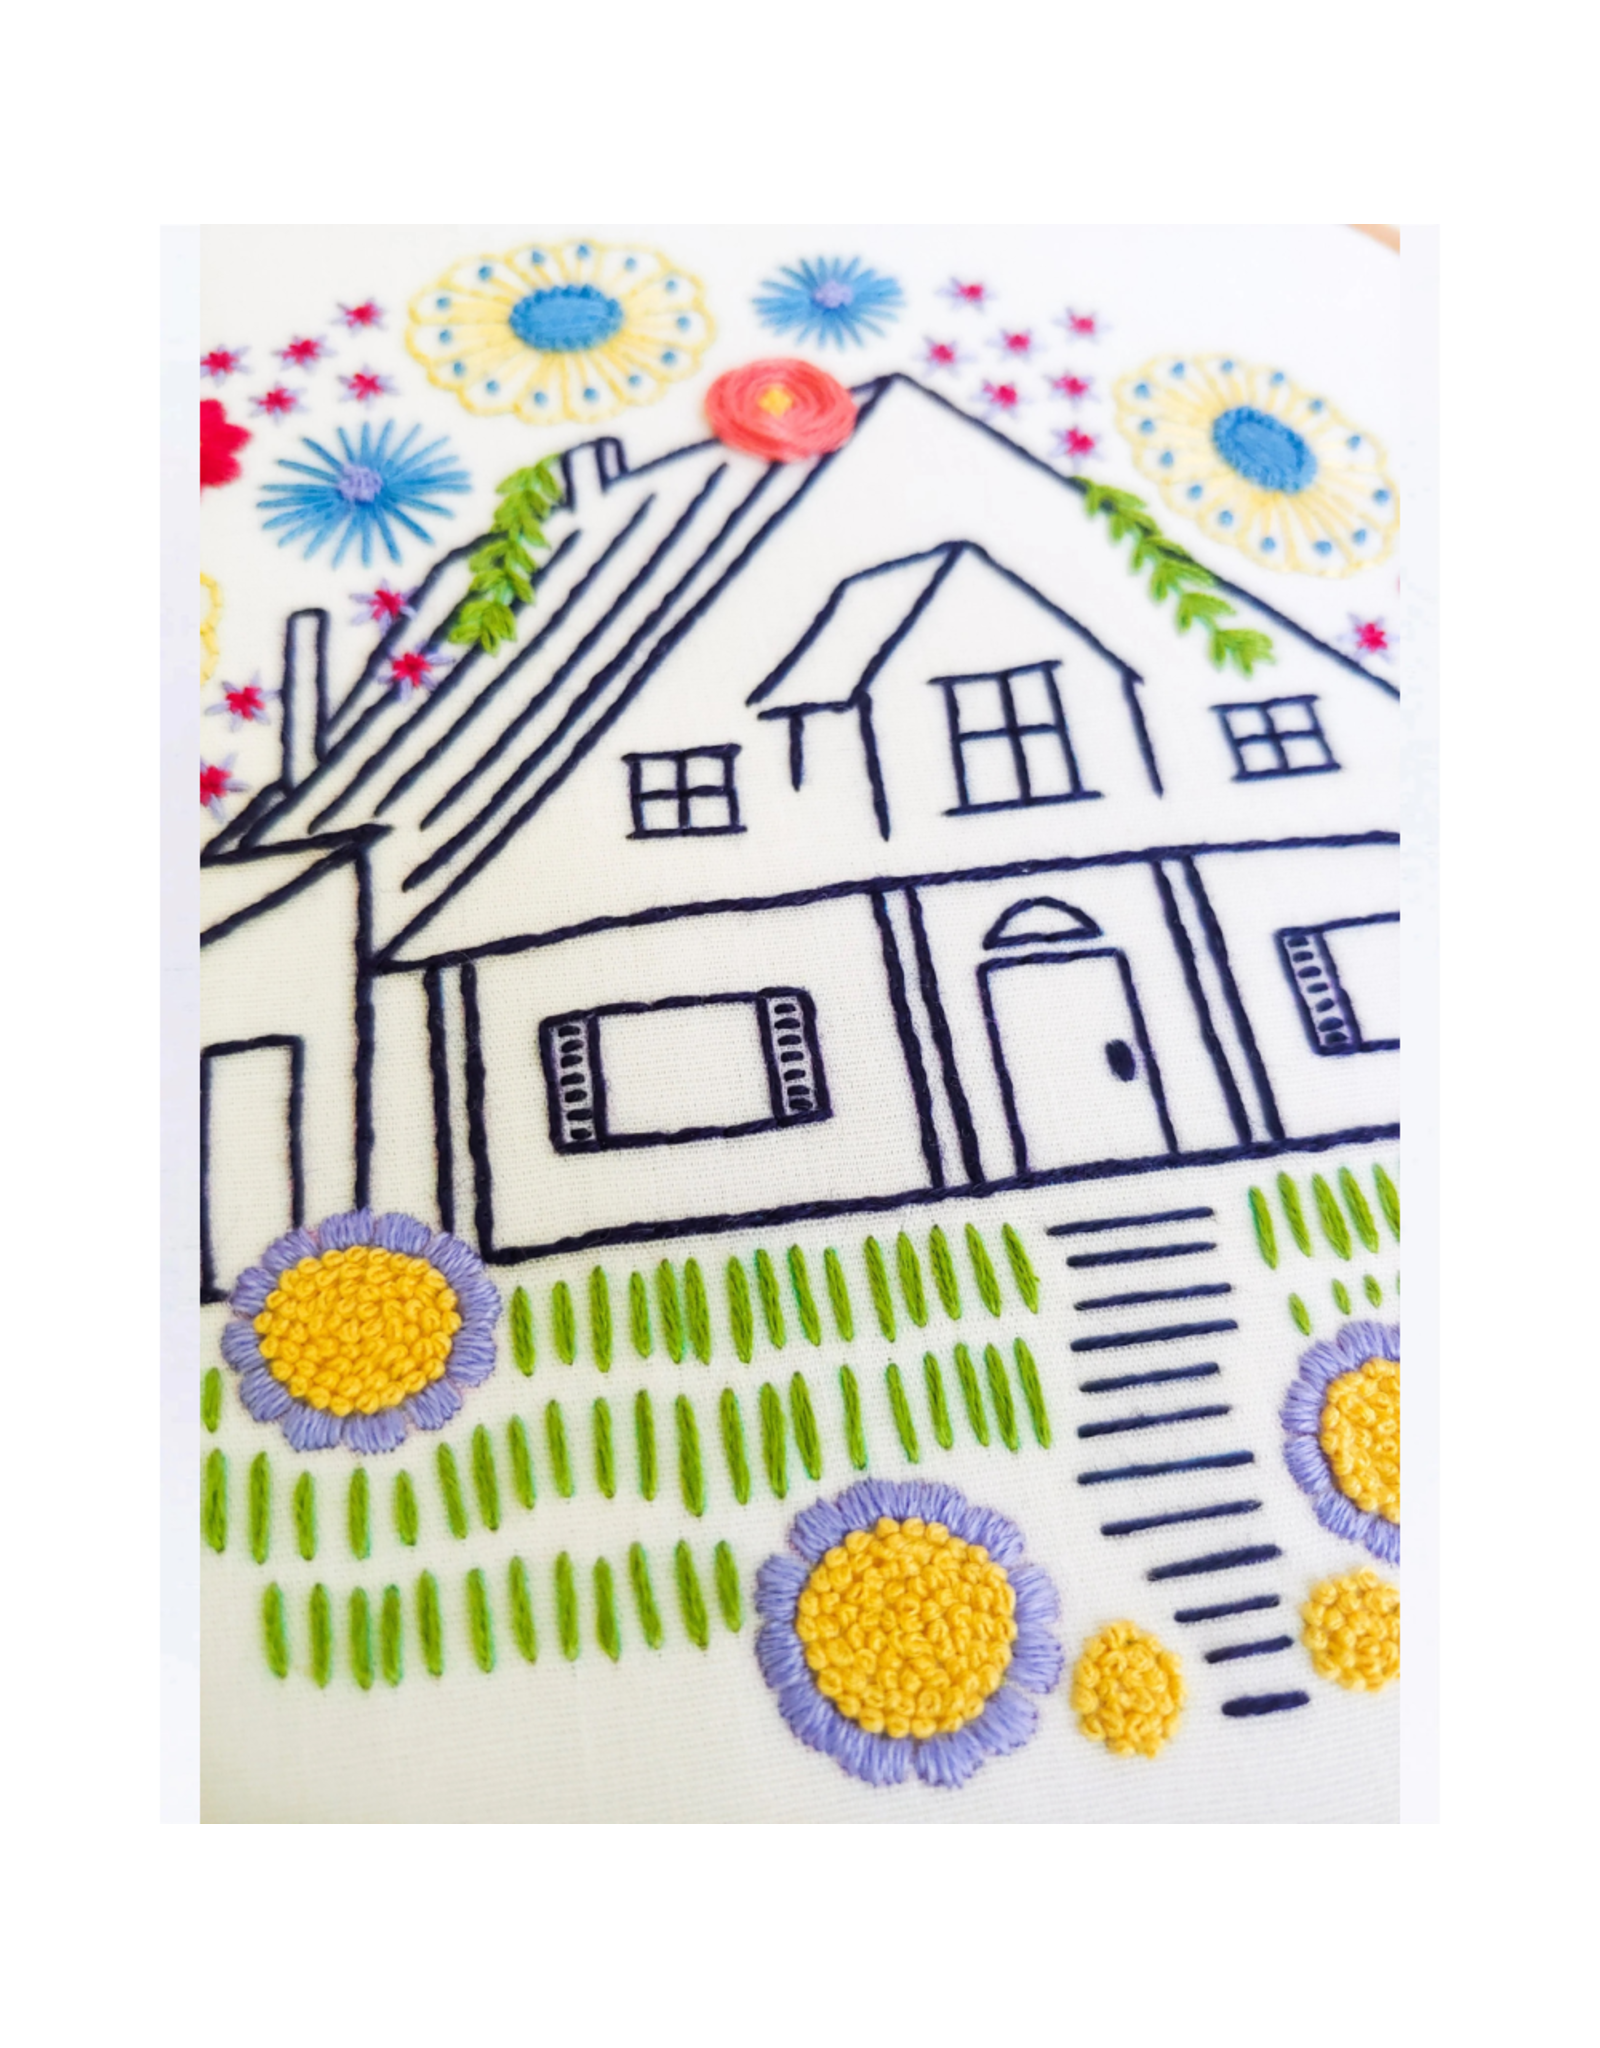 cozyblue *NEW* Guest House Embroidery Kit from cozyblue